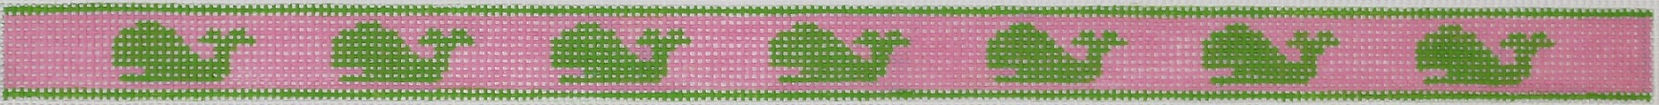 Sunglass Strap – Lime Green Whales on Pink